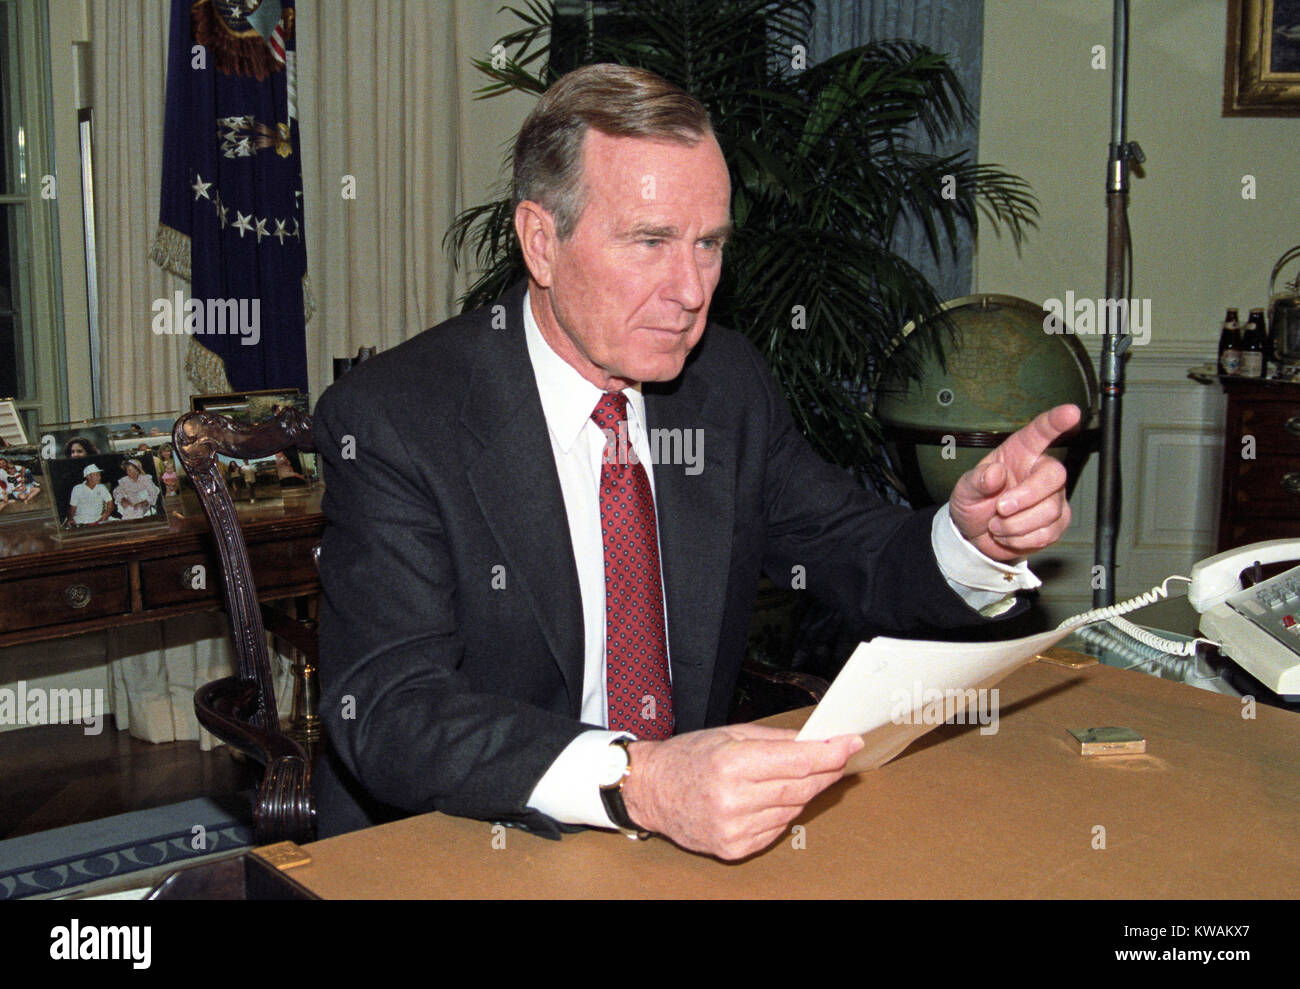 United States President George H.W. Bush poses for photographers after delivering an address to the nation from the Oval Office of the White House in Washington, DC on Christmas Day, December 25, 1991 announcing the resignation of President Mikhail Gorbachev as President of the Union of Soviet Socialist Republics, marking the collapse of the Soviet Union and the end of the Cold War. Credit: Arnie Sachs/CNP - NO WIRE SERVICE - Photo: Arnie Sachs/Consolidated/dpa Stock Photo